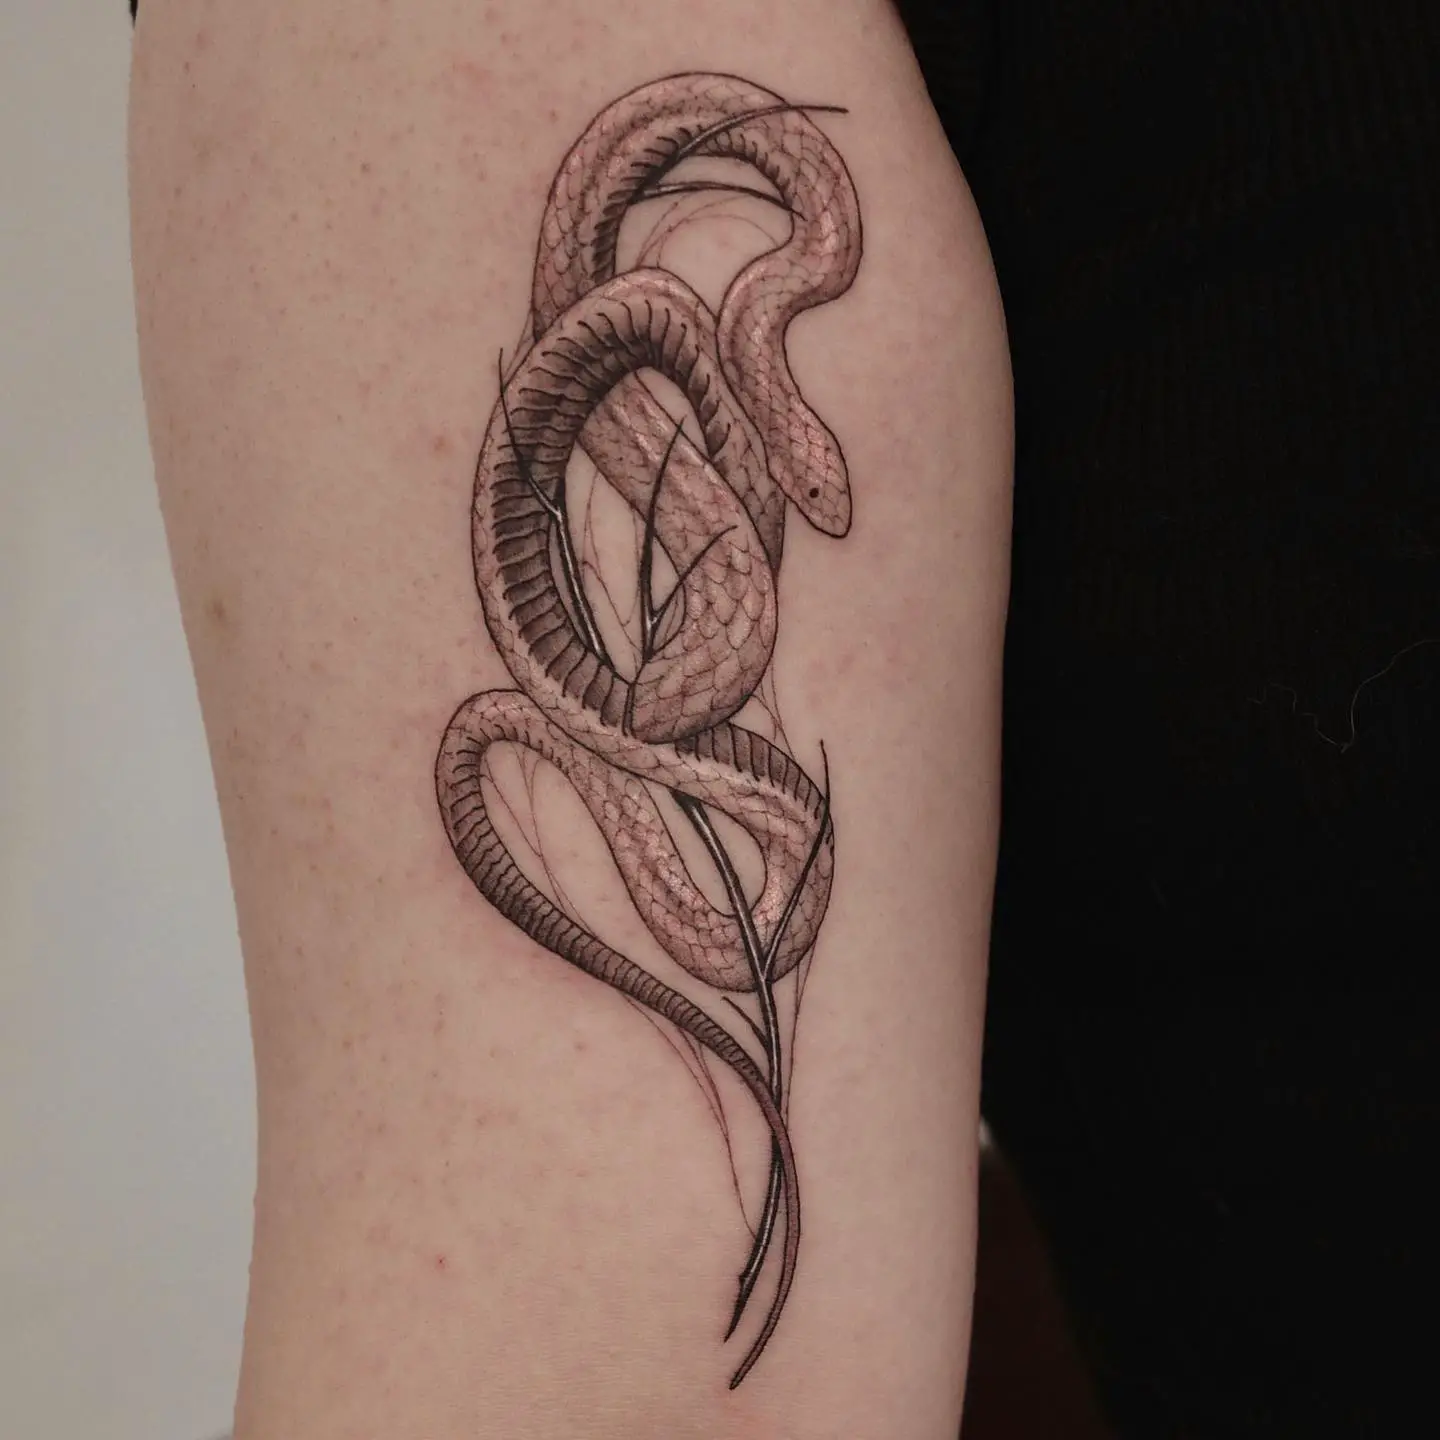 White snake tattoo by 1013blk